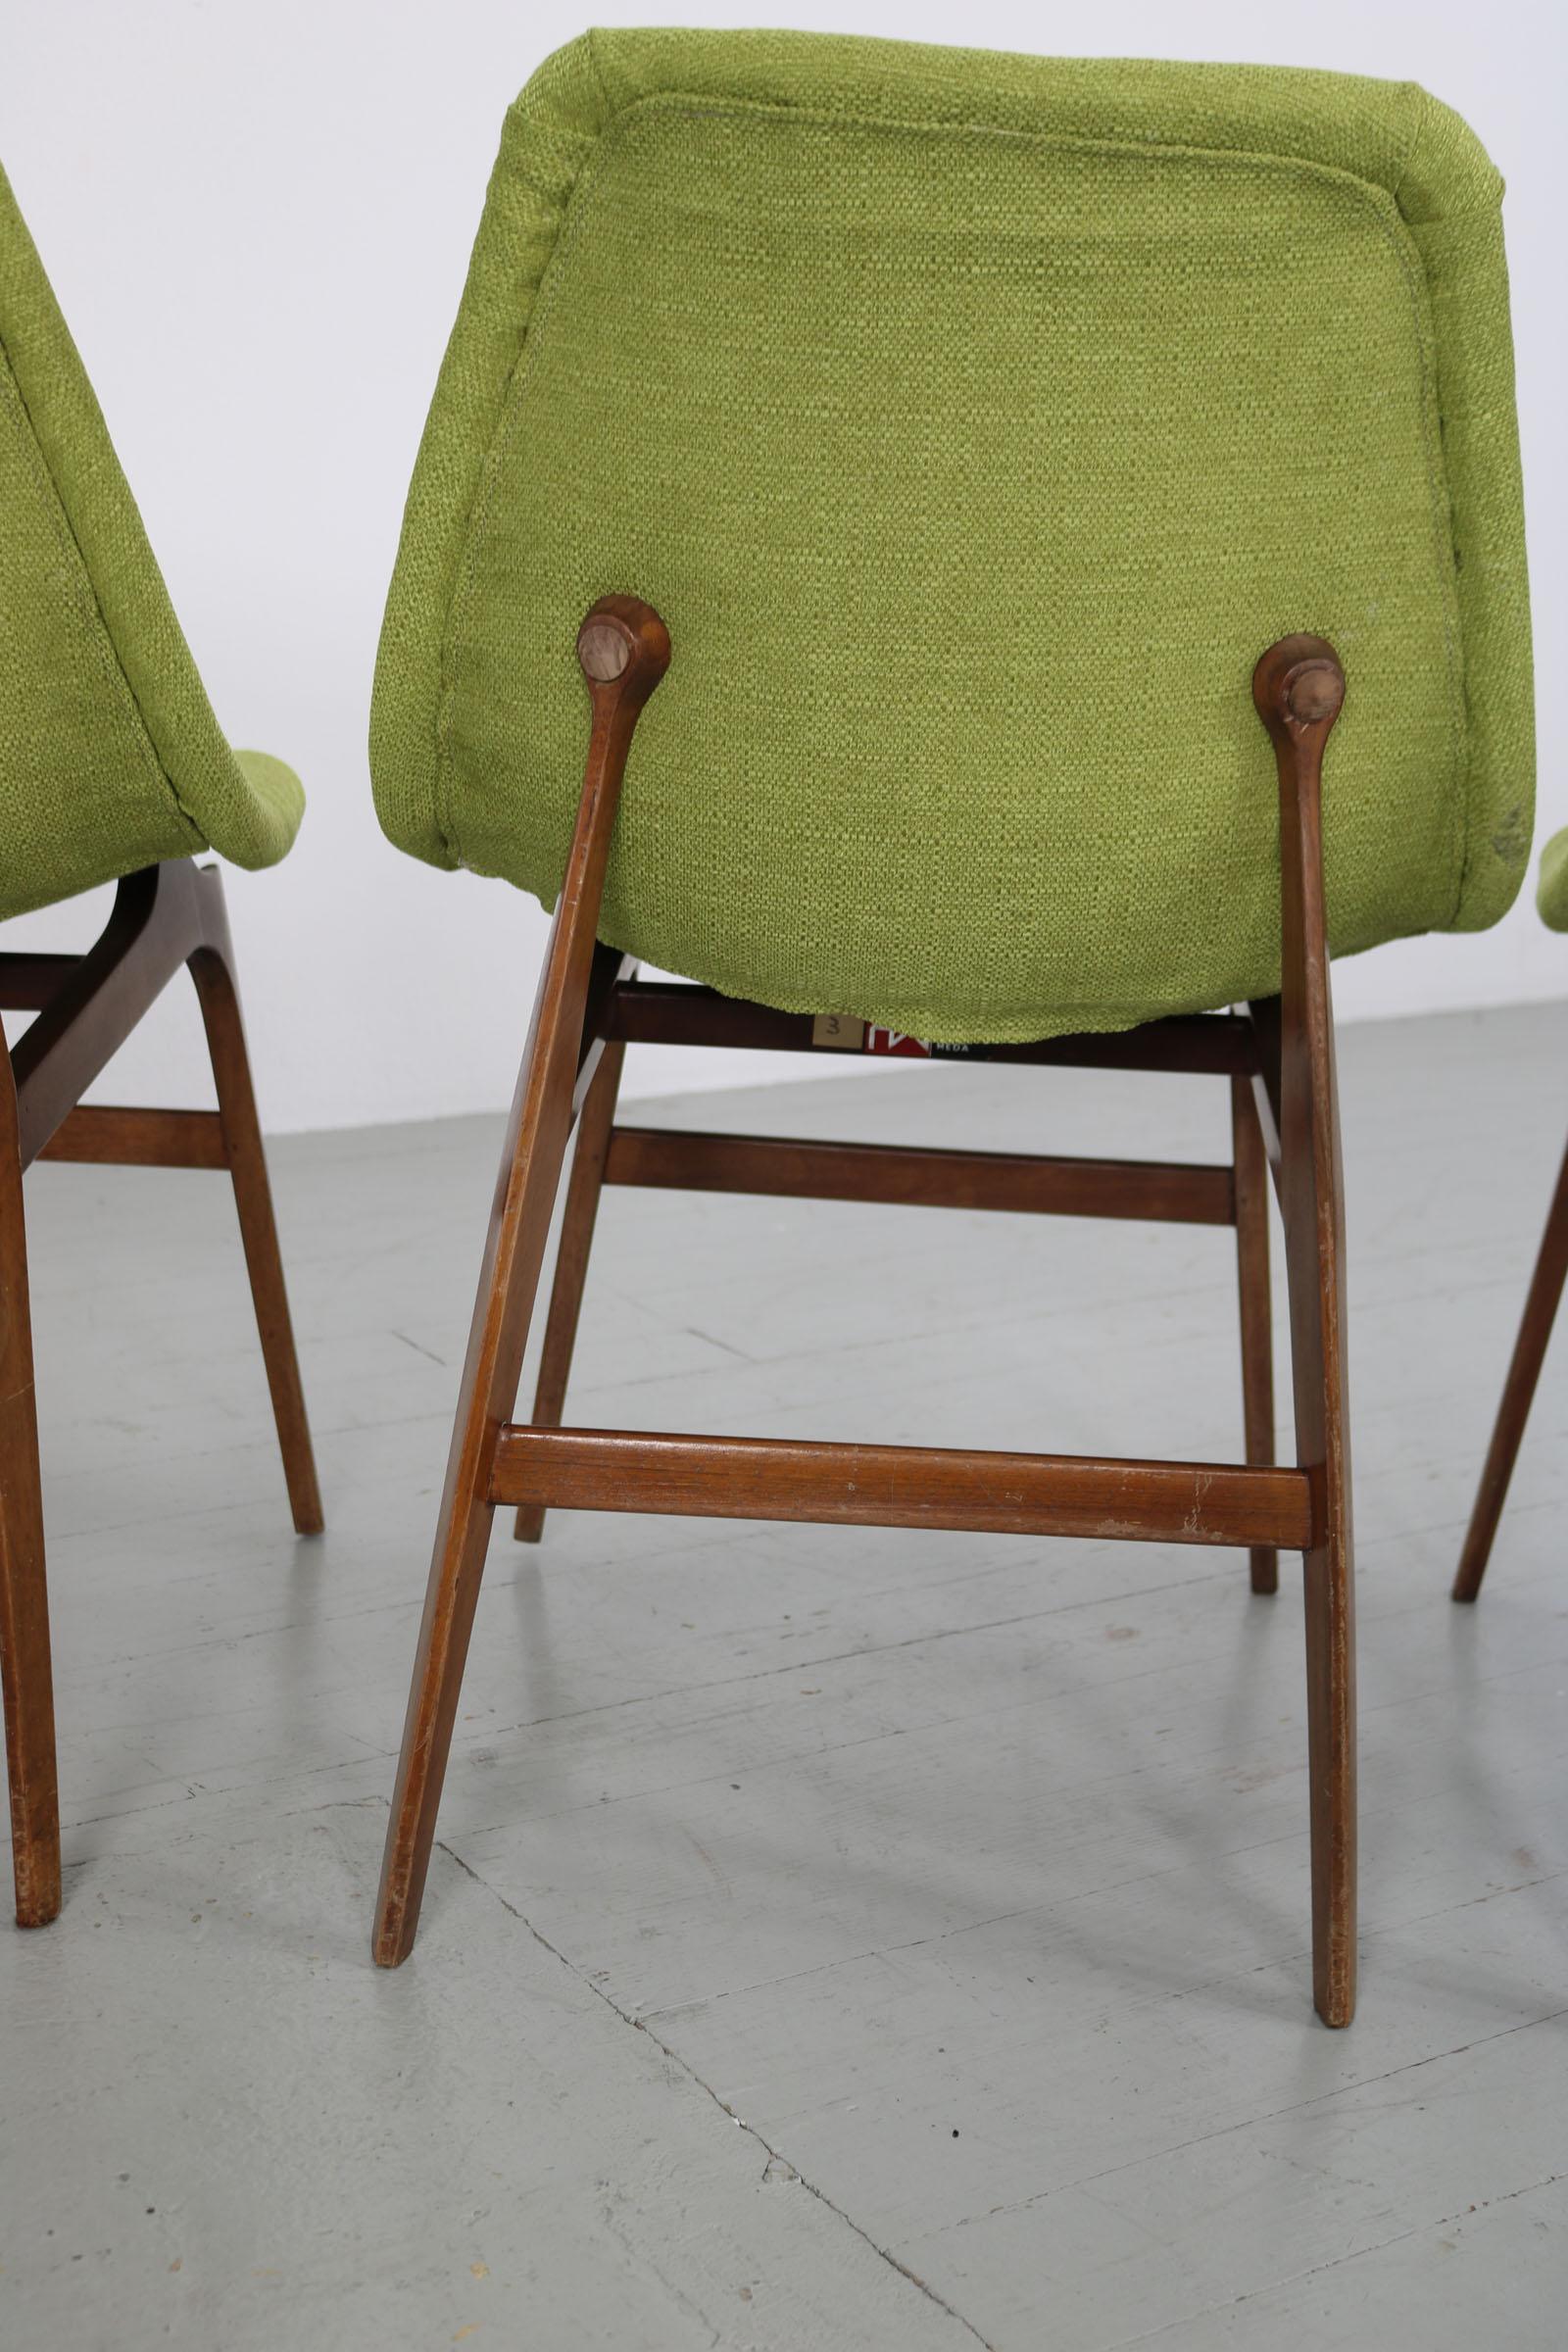 Set of 4 Busnelli Meda Teak Chairs, Italy 1960s For Sale 4